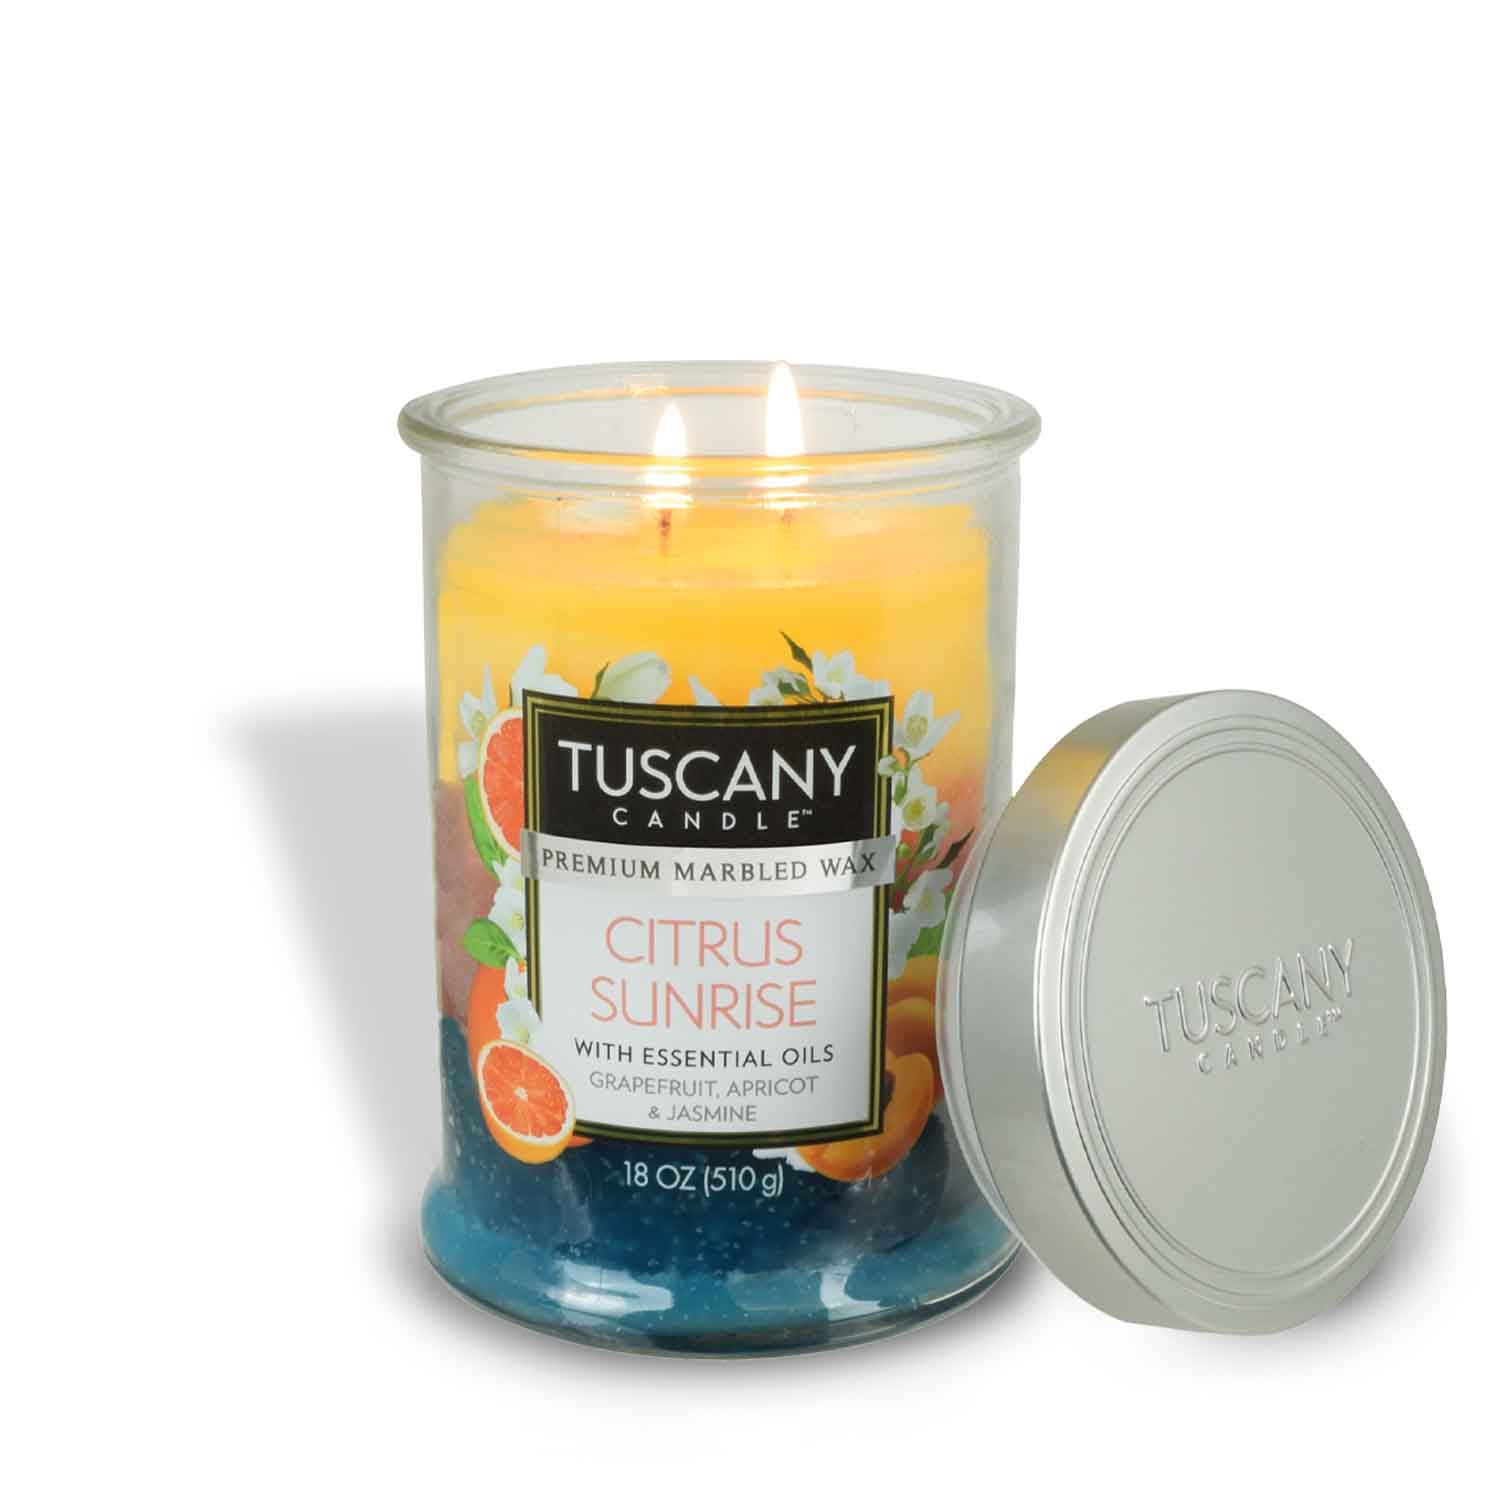 Tuscany Candle Citrus Sunrise Long-Lasting Scented Jar Candle (18 oz) in a delightful apricot scent.